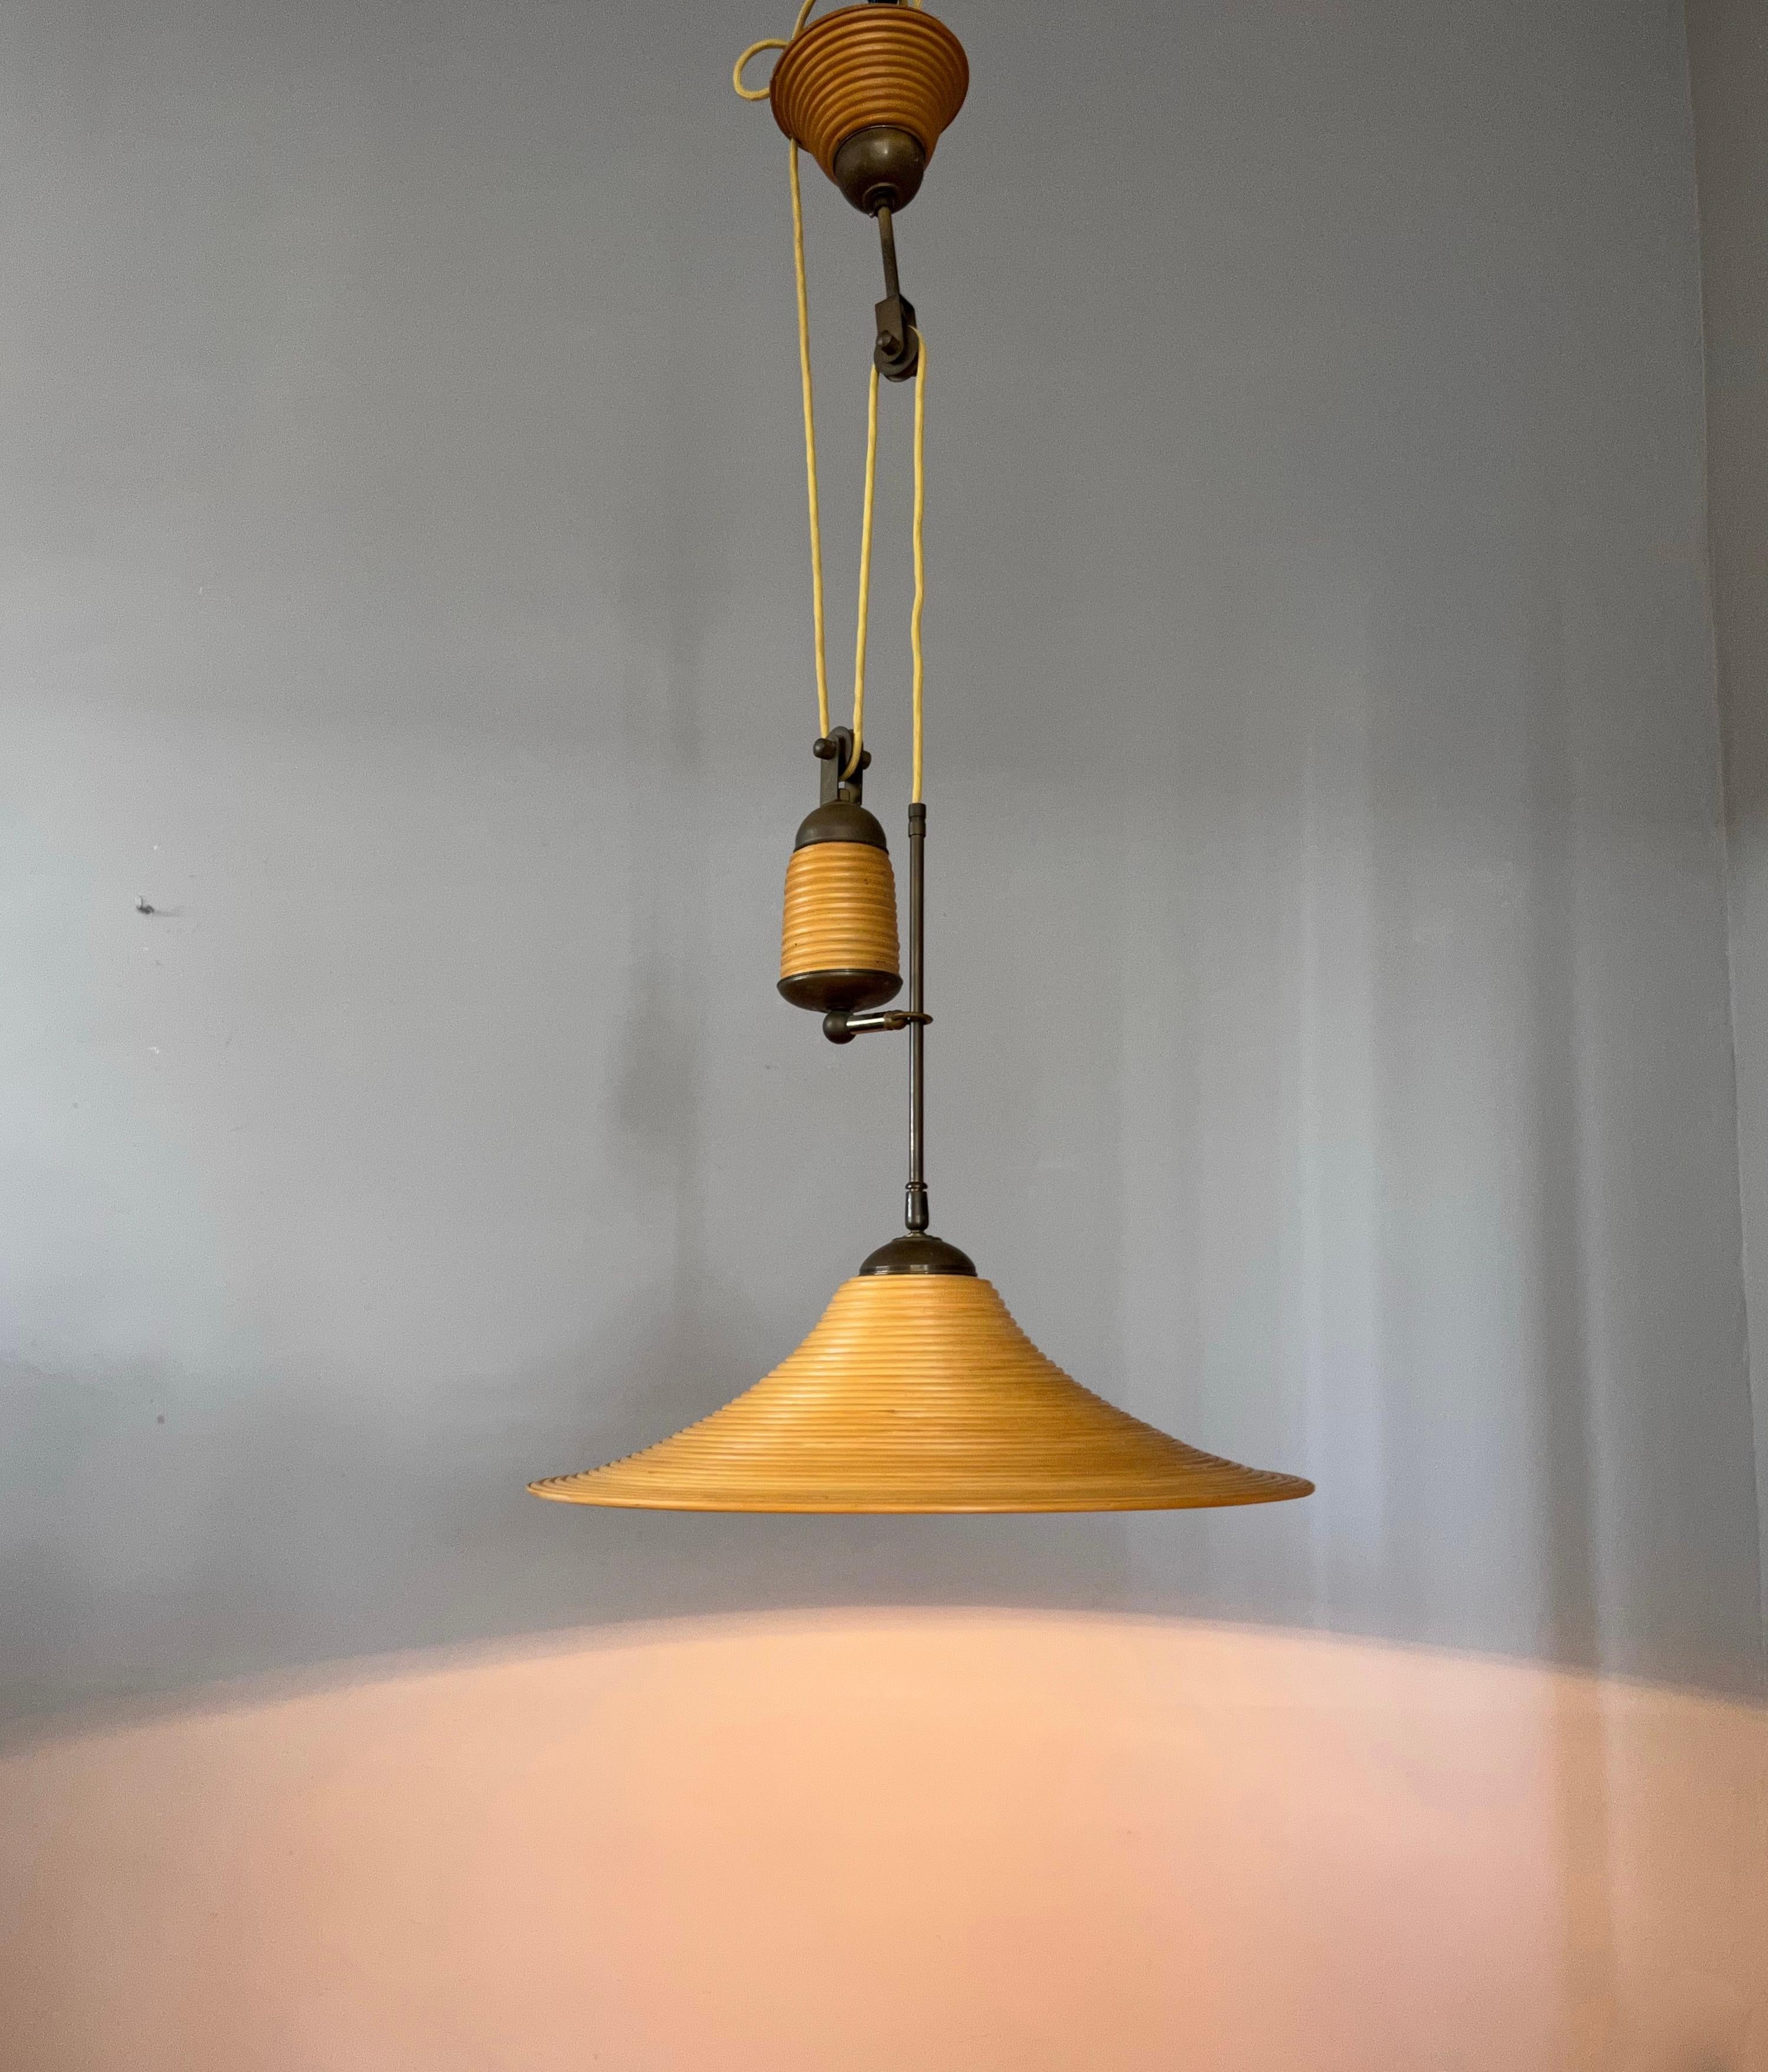 Rare Handcrafted Mid-Century Modern Rattan & Brass Pendant Light / Ceiling Lamp For Sale 1